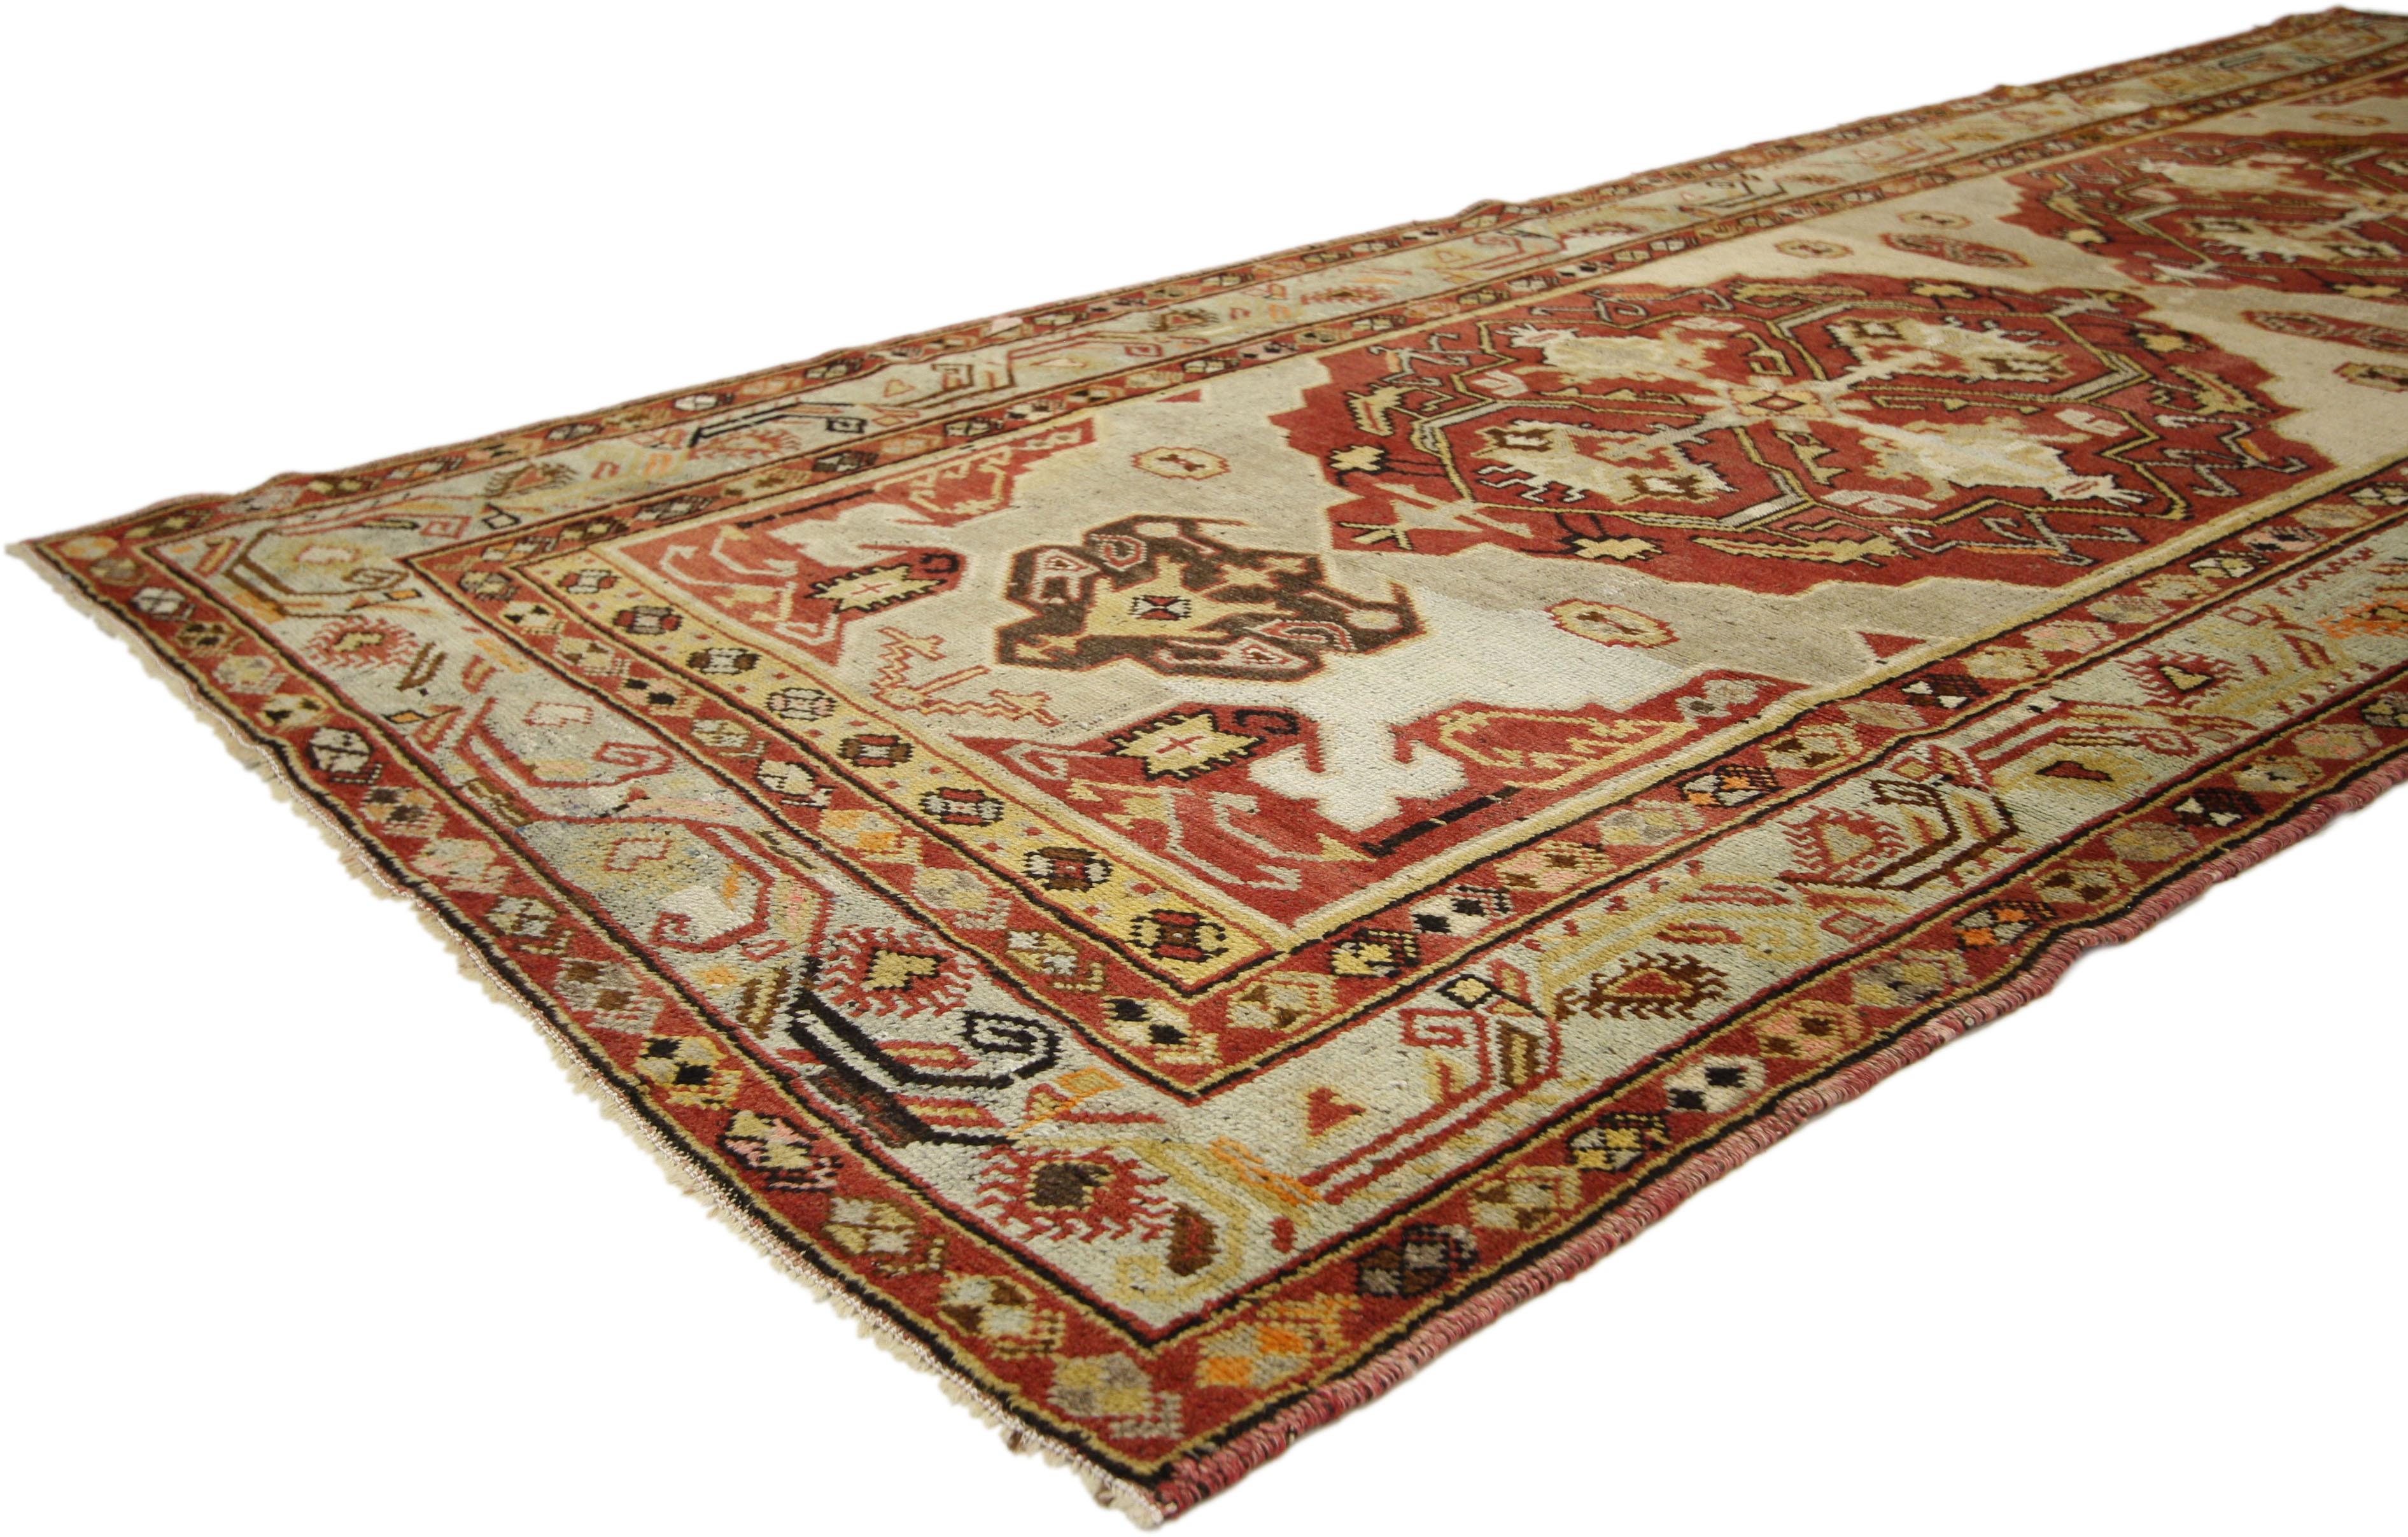 73769, vintage Turkish Oushak runner with Tribal design and rustic style, hallway runner. Hand knotted wool vintage Turkish Oushak runner featuring two large geometric medallions and tribal motifs in an open abrashed beige field surrounded by a